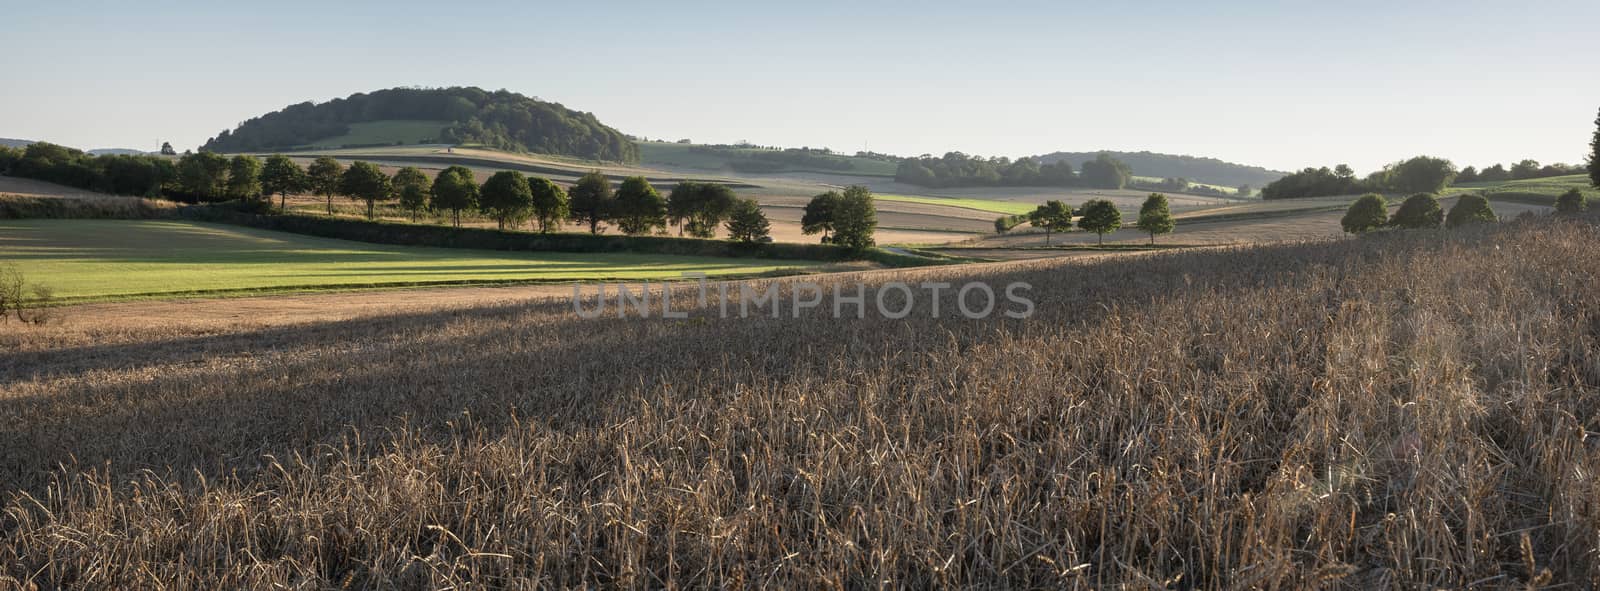 rural landscape of countryside with cornfields and meadows in regional parc de caps et marais d'opale in the north of france